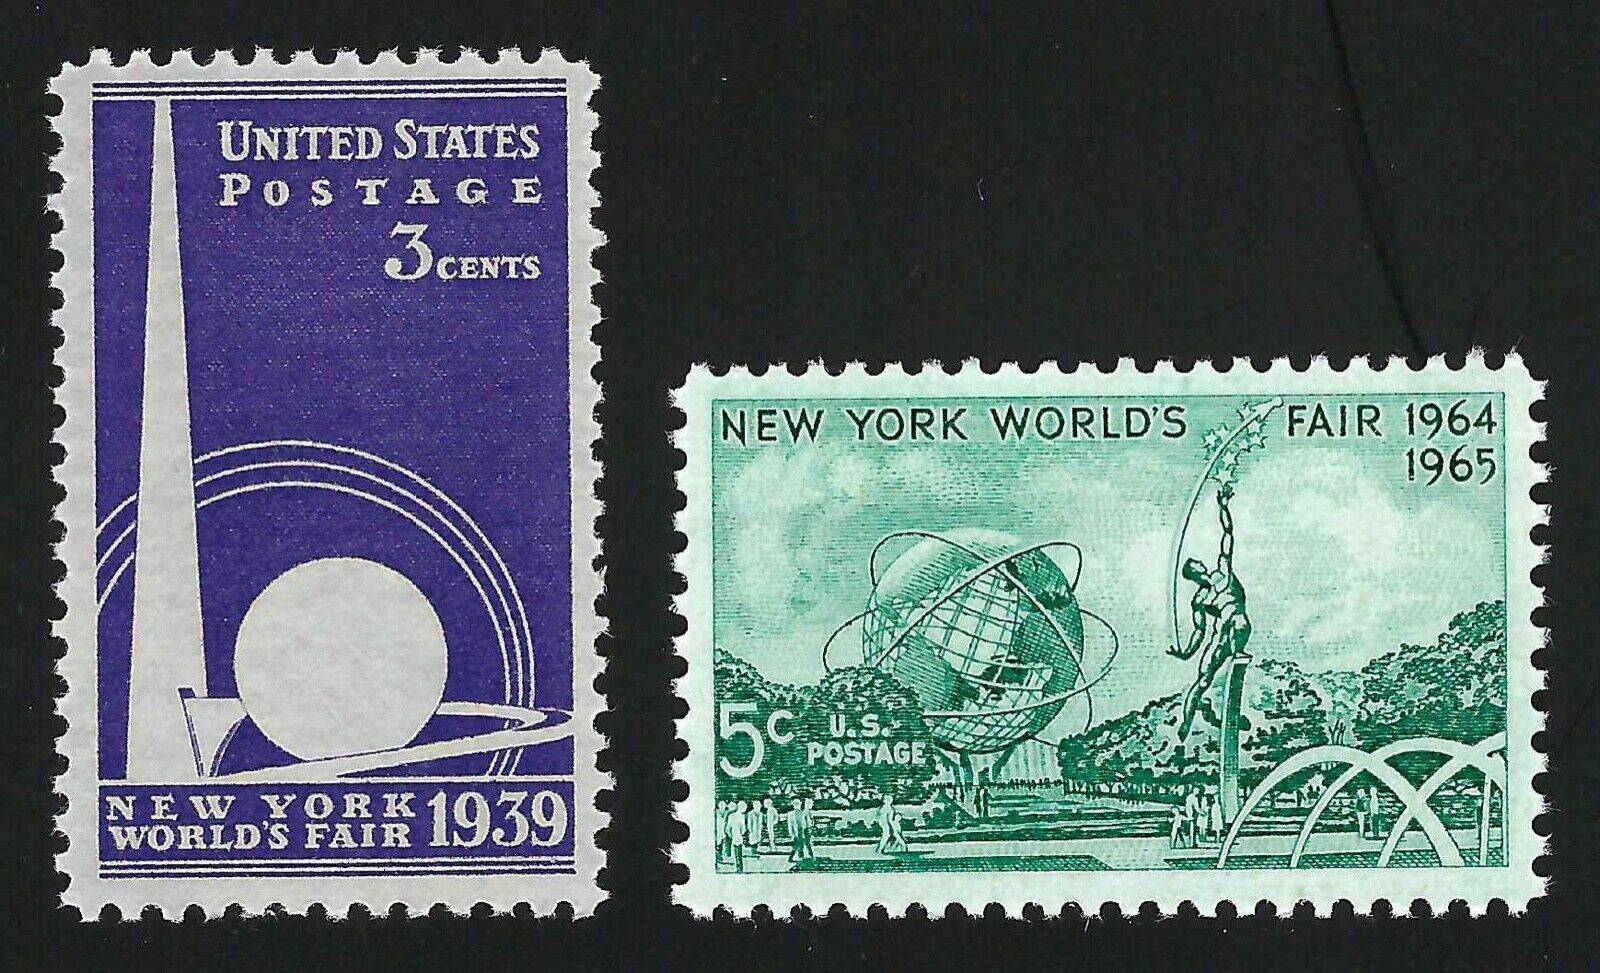 1939 Trylon And Perisphere And 1964 Unisphere New York World's Fair Stamps Mint